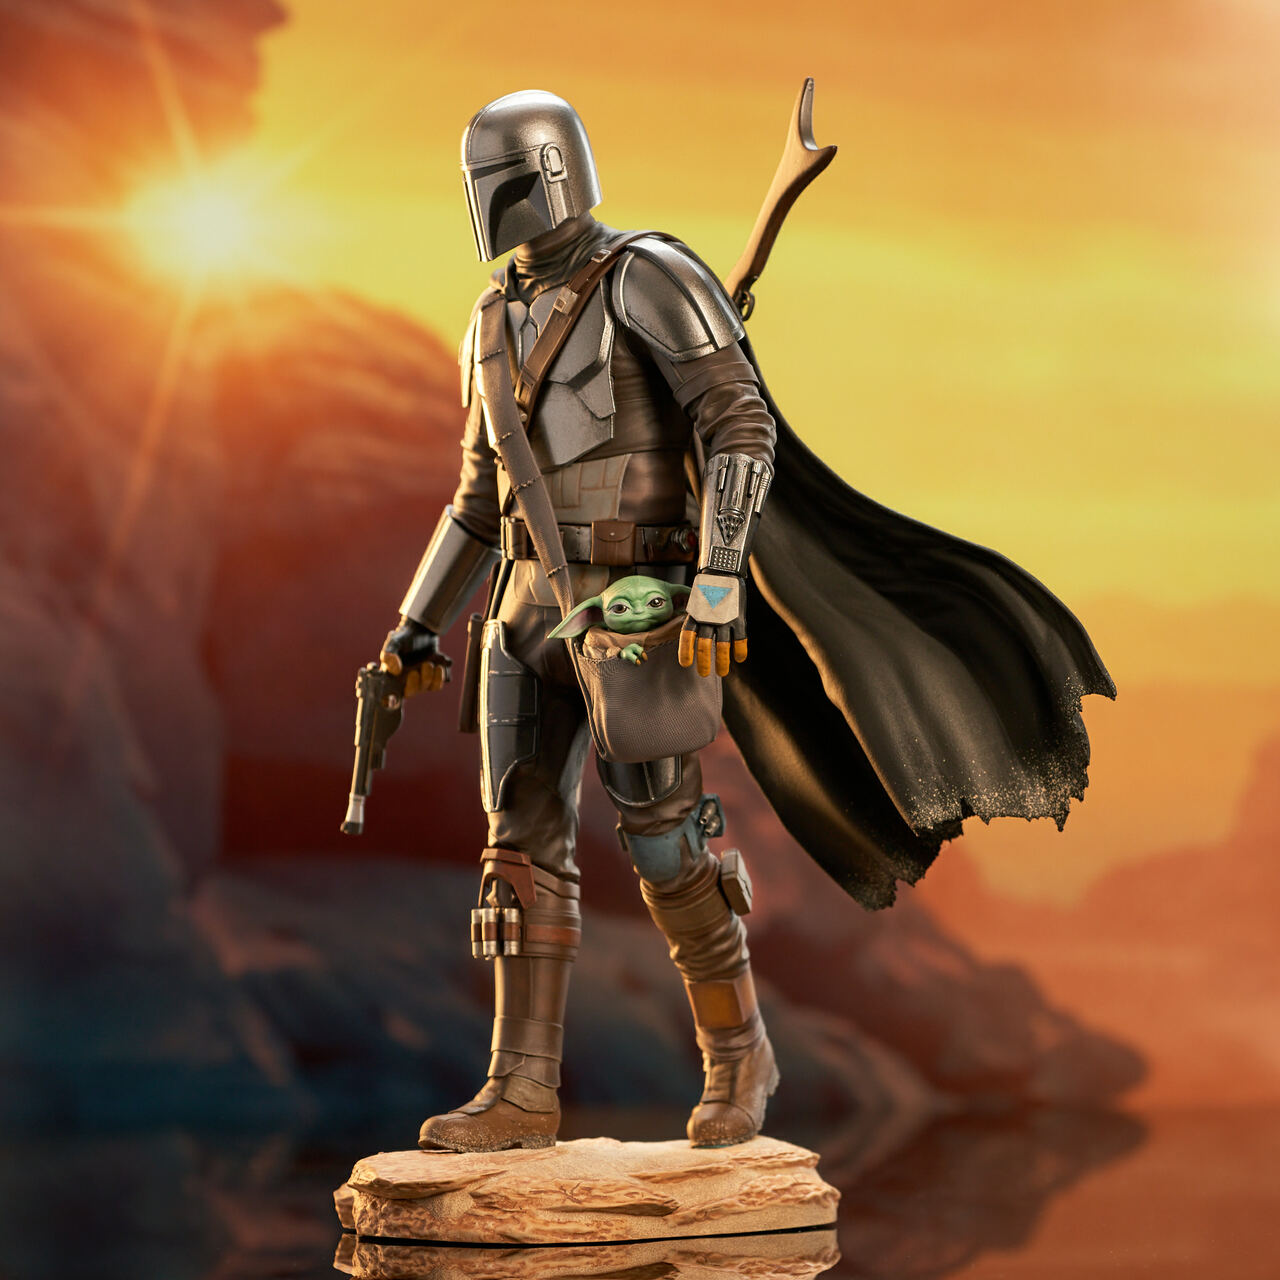 Star Wars Mandalorian with Child Premier Collection Statue Hasbro